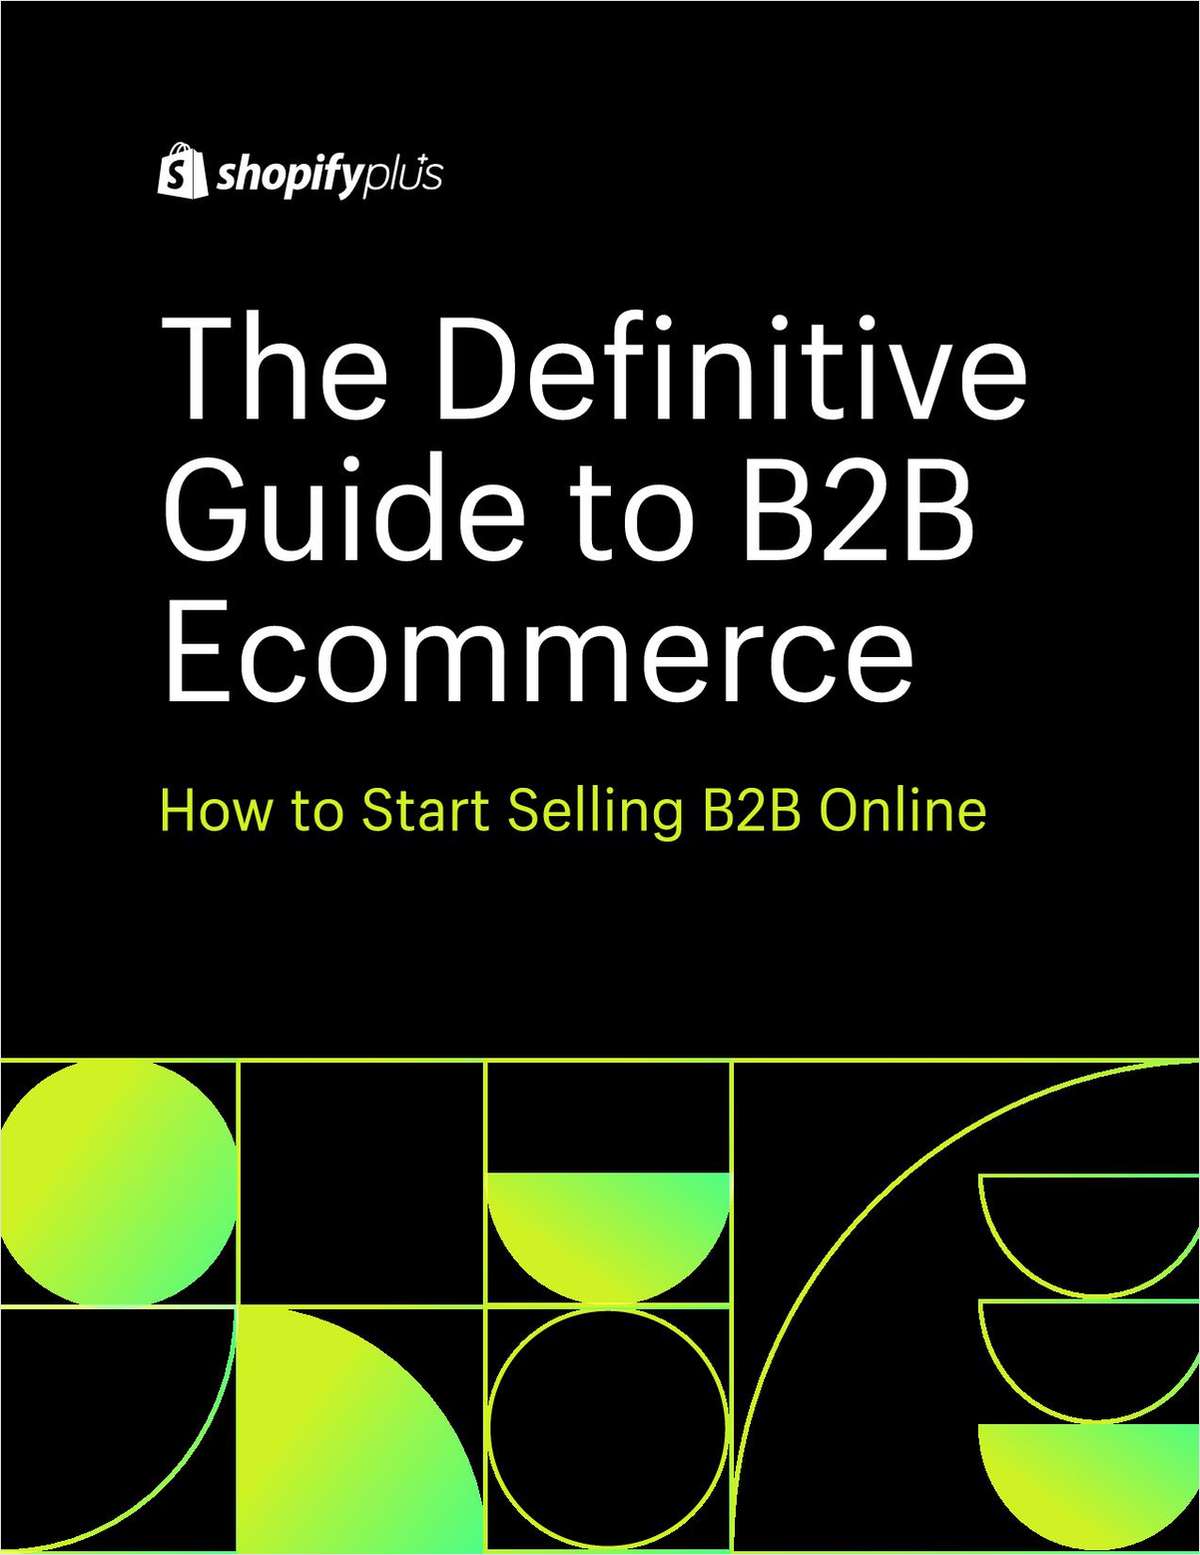 How to Start Selling B2B Online